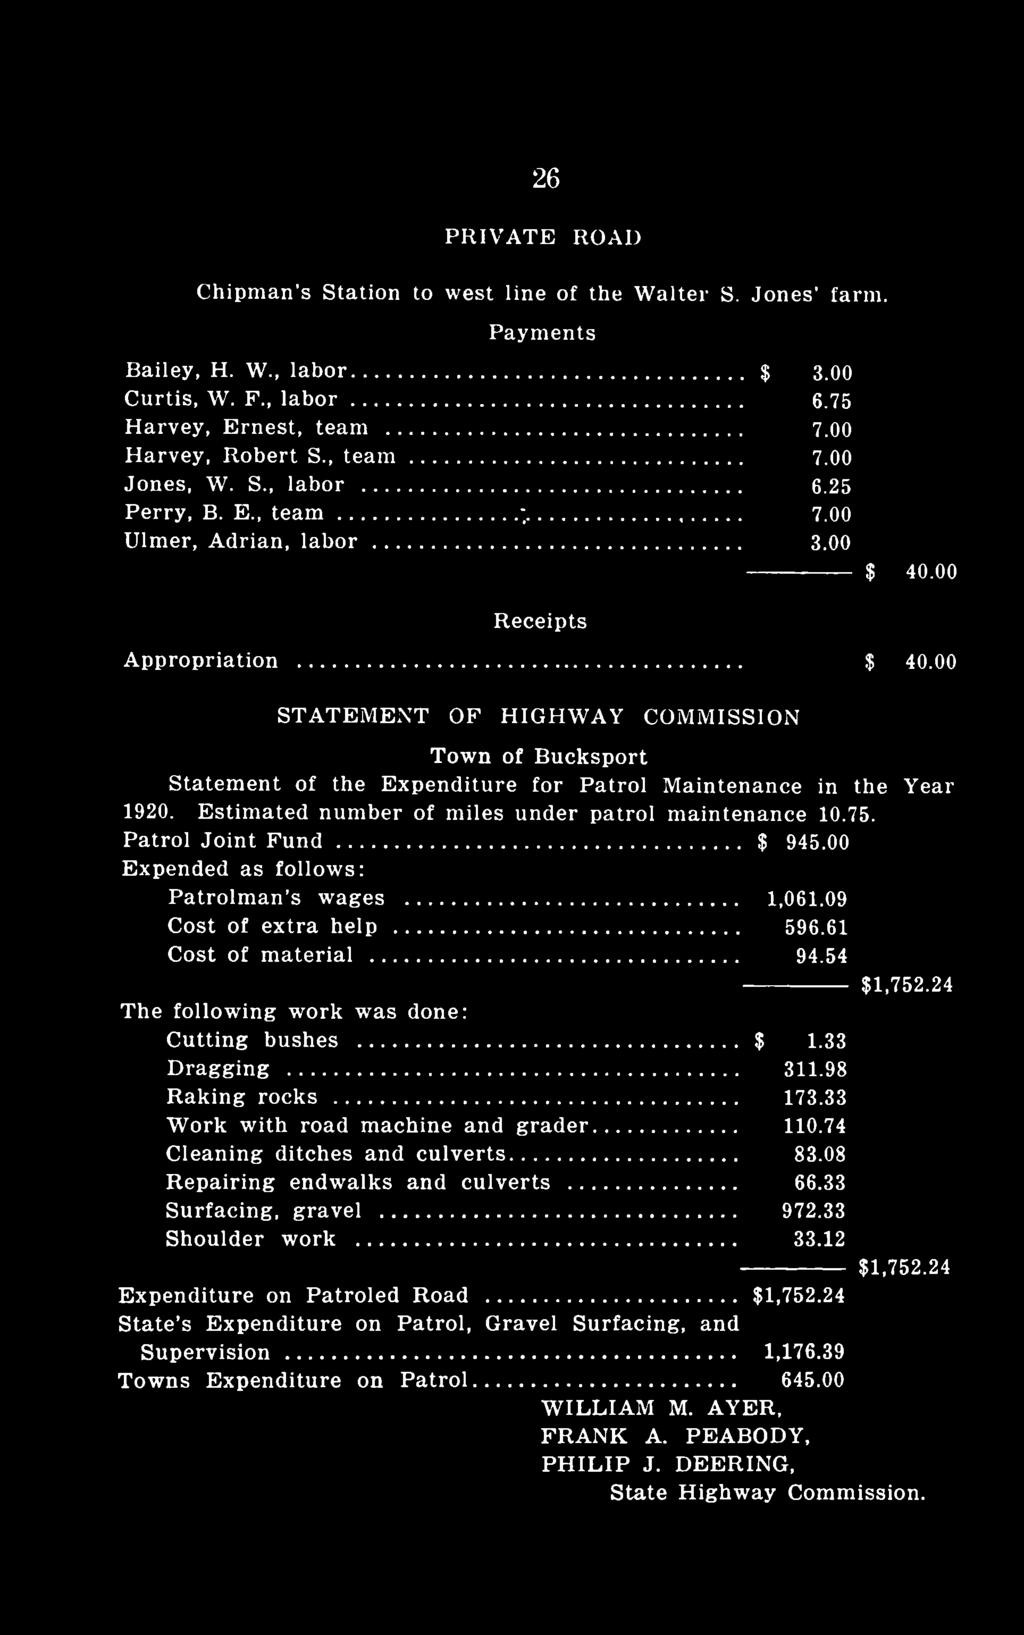 00 Receipts Appropriation... $ 40.00 STATEMENT OF HIGHWAY COMMISSION Town of Bucksport Statement of the Expenditure for Patrol Maintenance in the Year 1920.